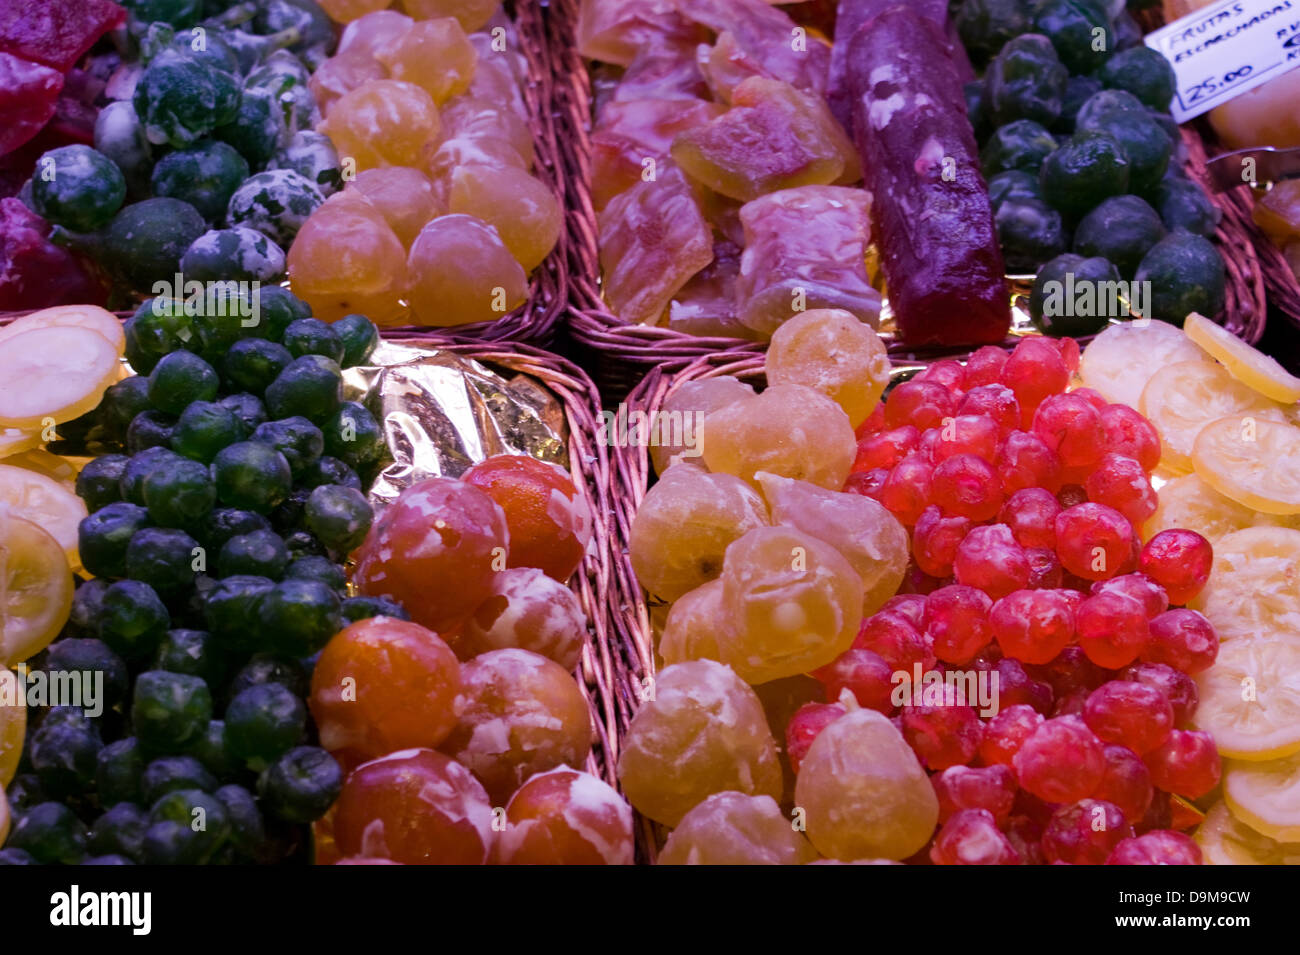 A selection of dried glace fruits displayed in baskets at a stall in La Boqueria Market in Barcelona Spain Stock Photo